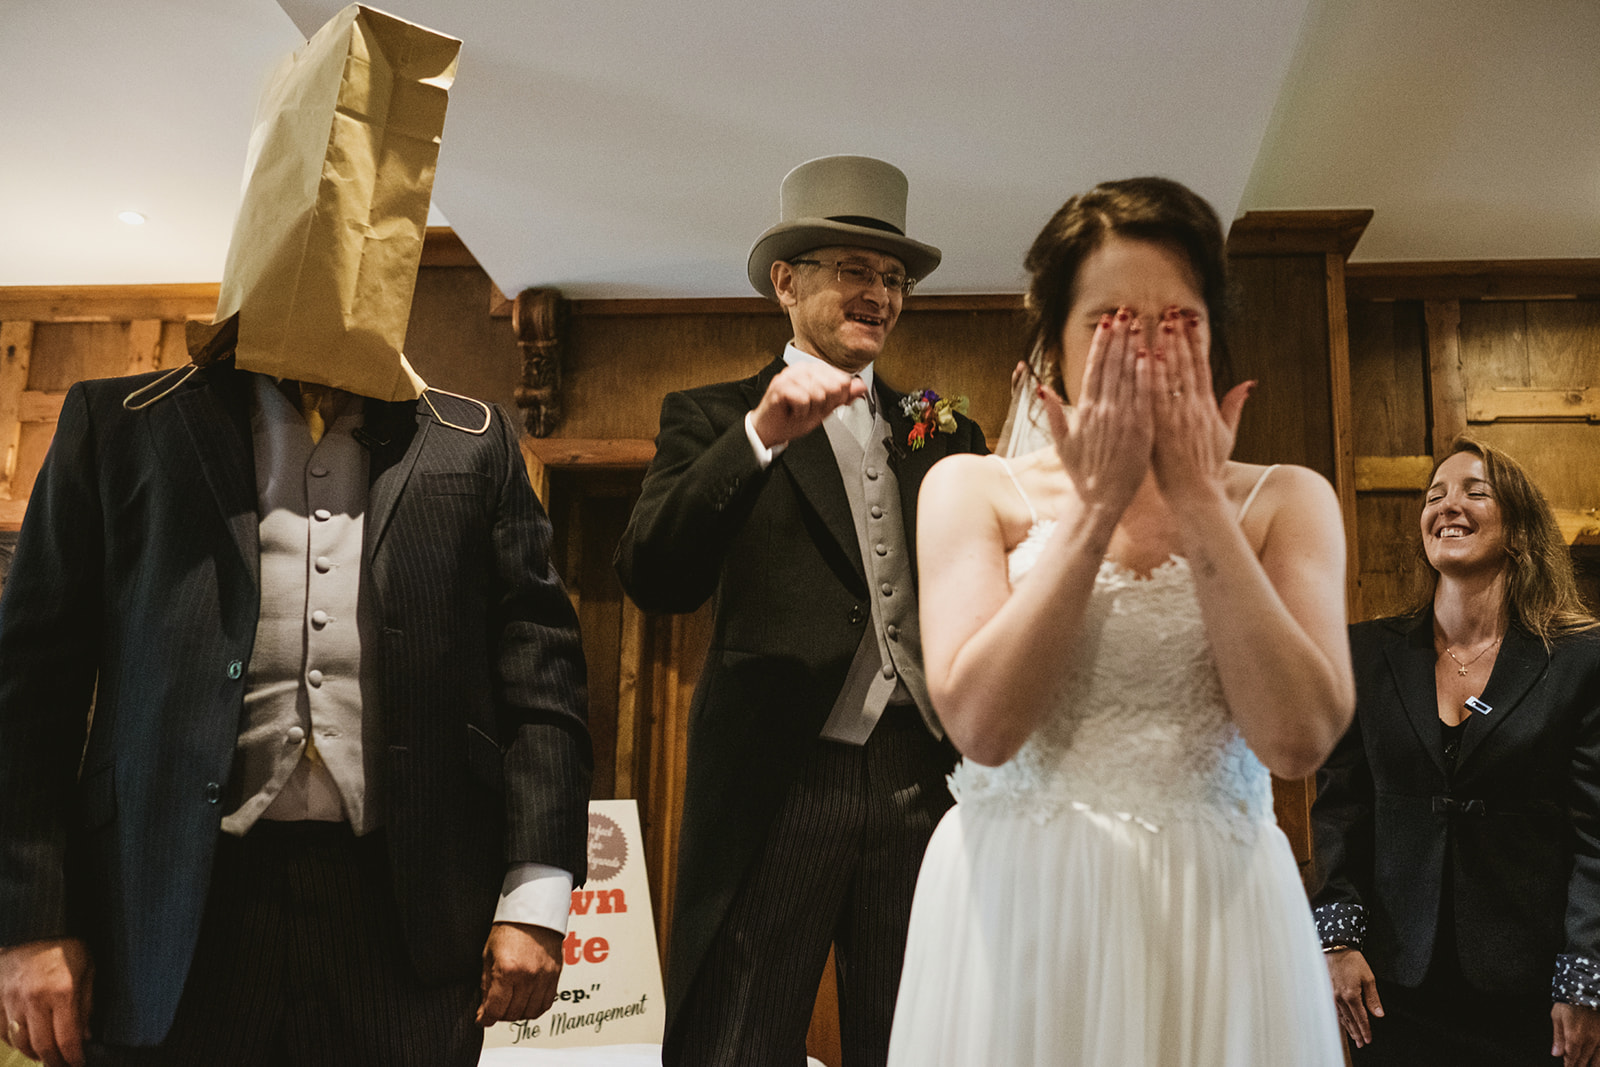 Gemma and John planned this hysterically funny Monty python themed wedding at the Ravenswood and chose brilliant UK wedding photographers York Place Studios to capture their day